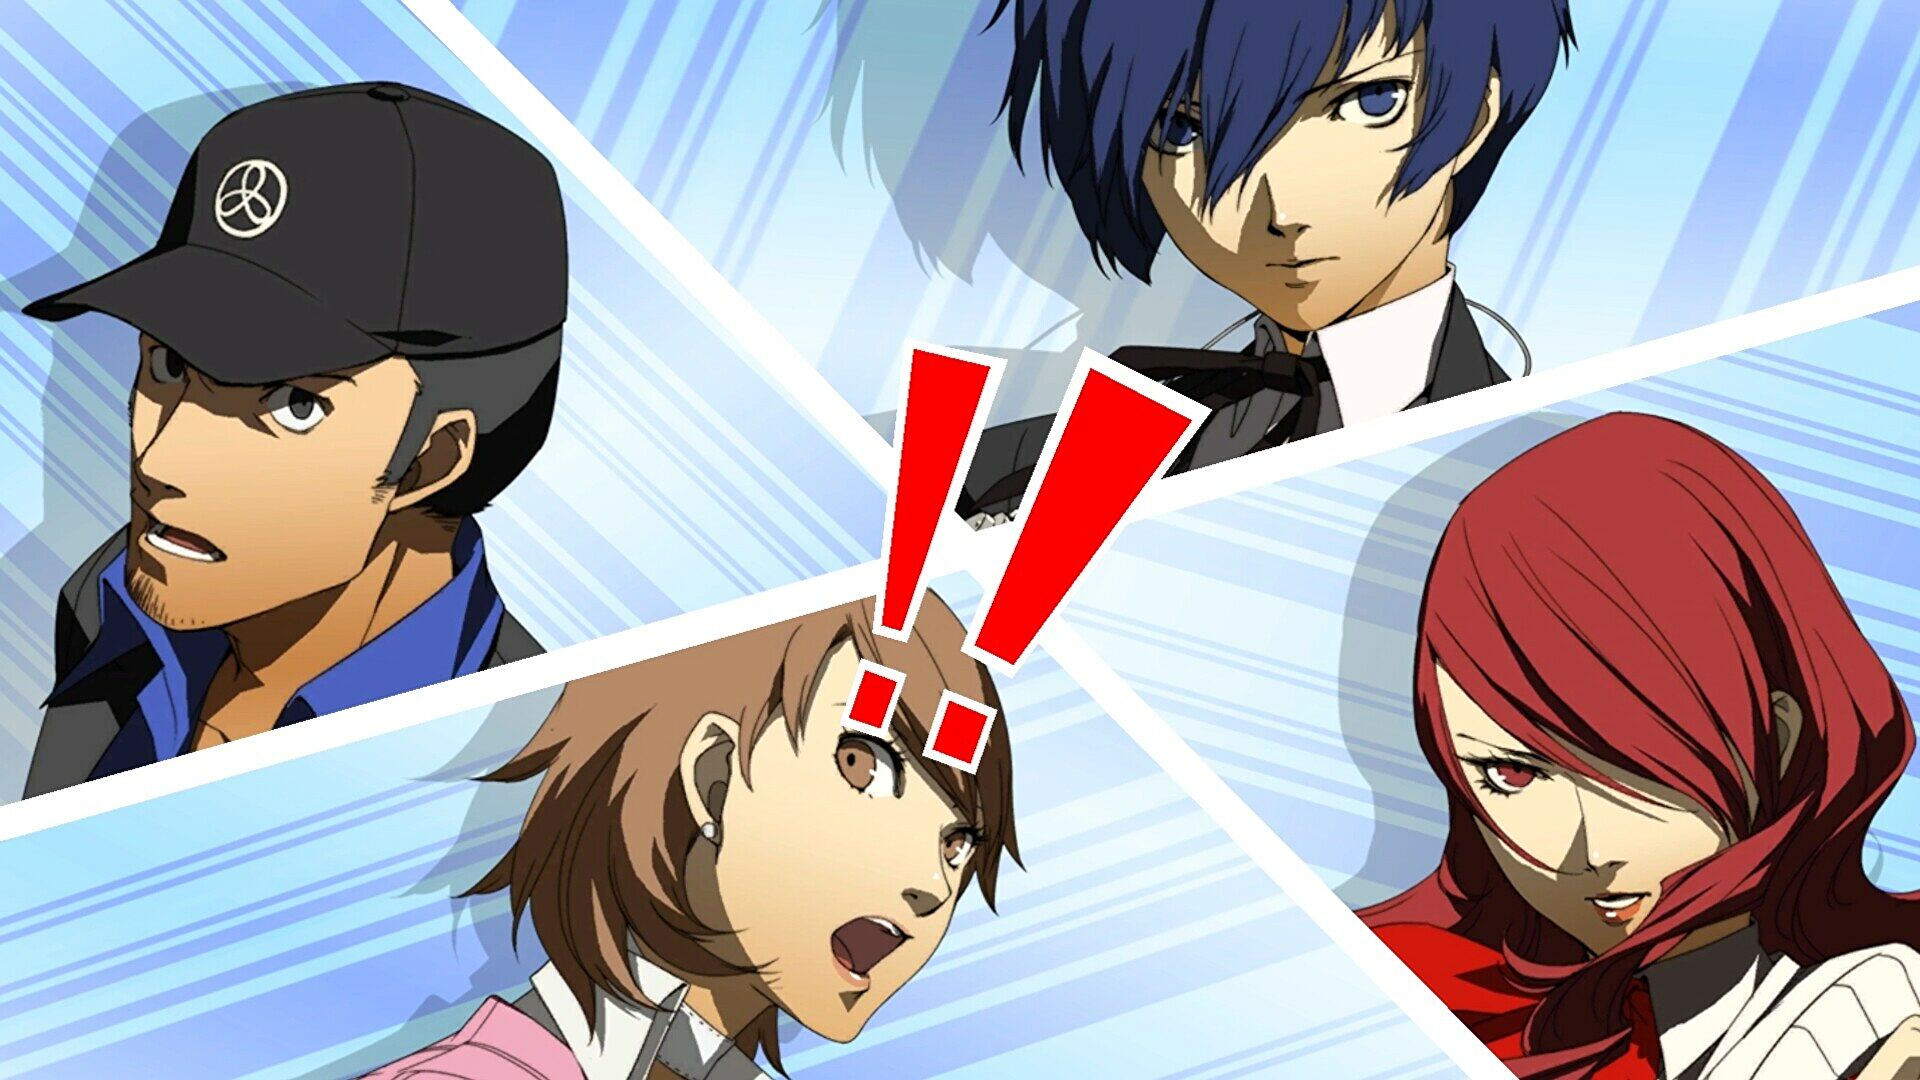 Persona 3 Portable isn’t only a great JRPG, but a history lesson too